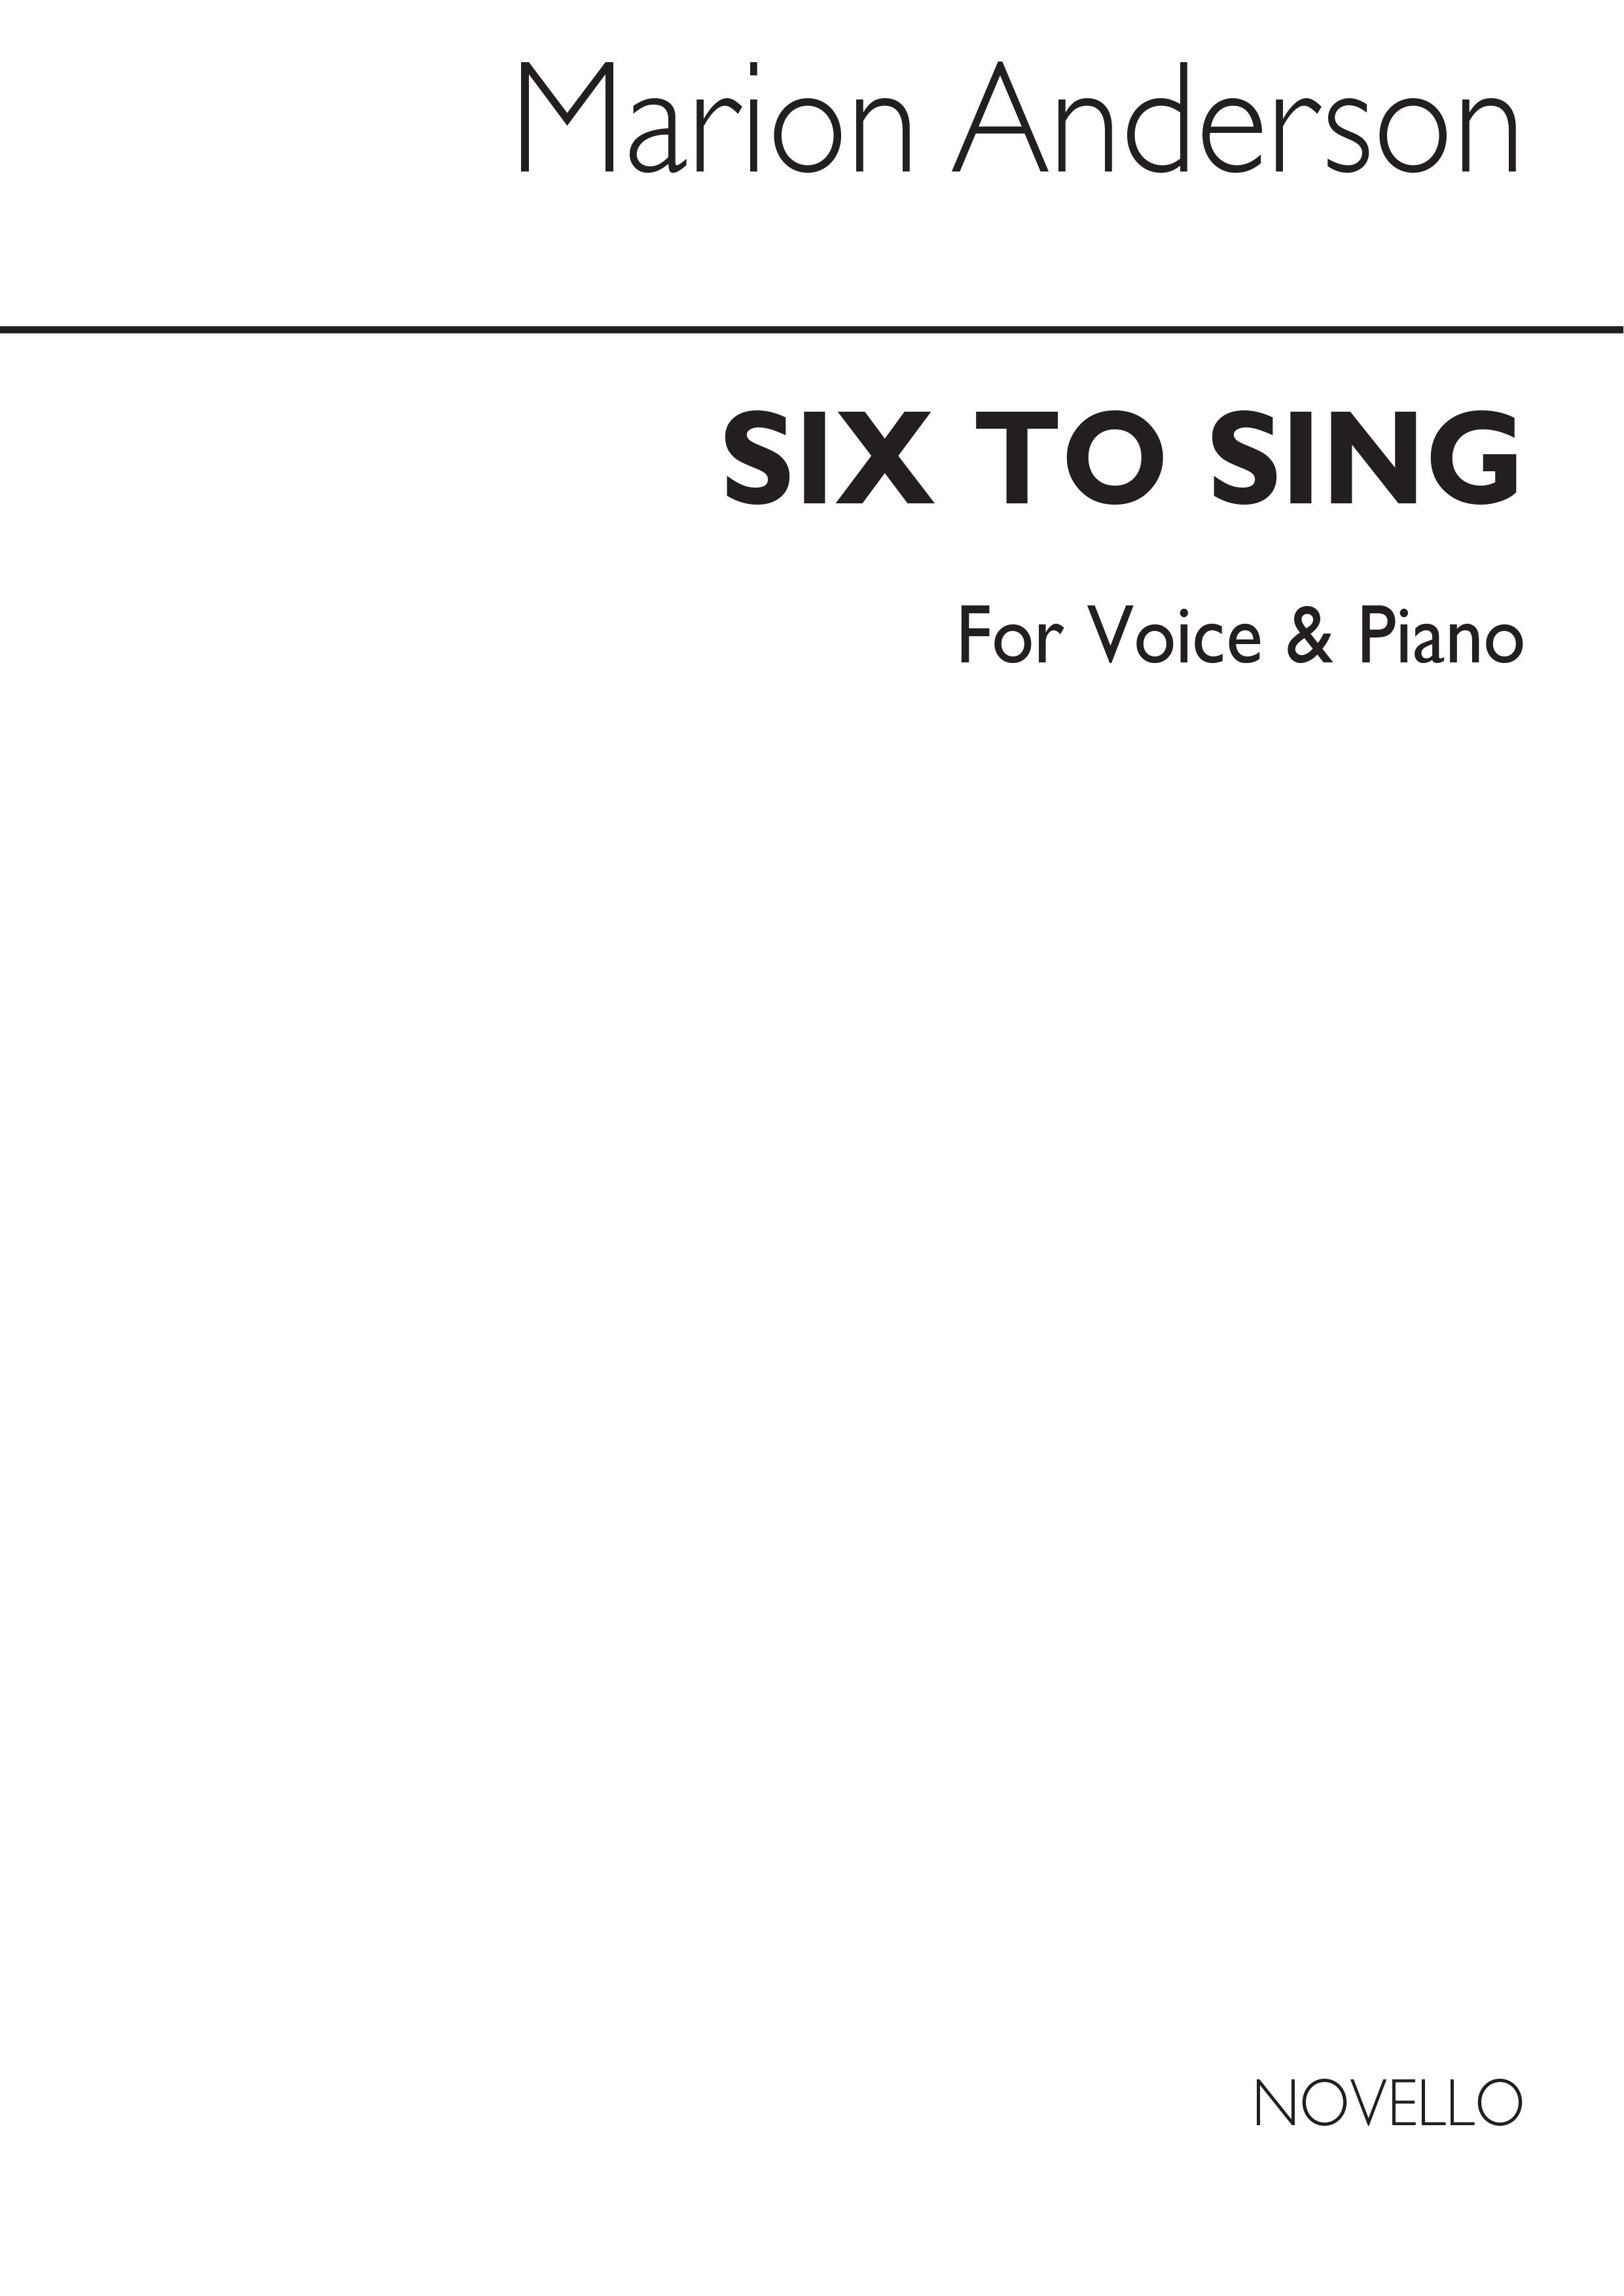 Marion Anderson: Six Songs For Beat Response for Voice and Piano